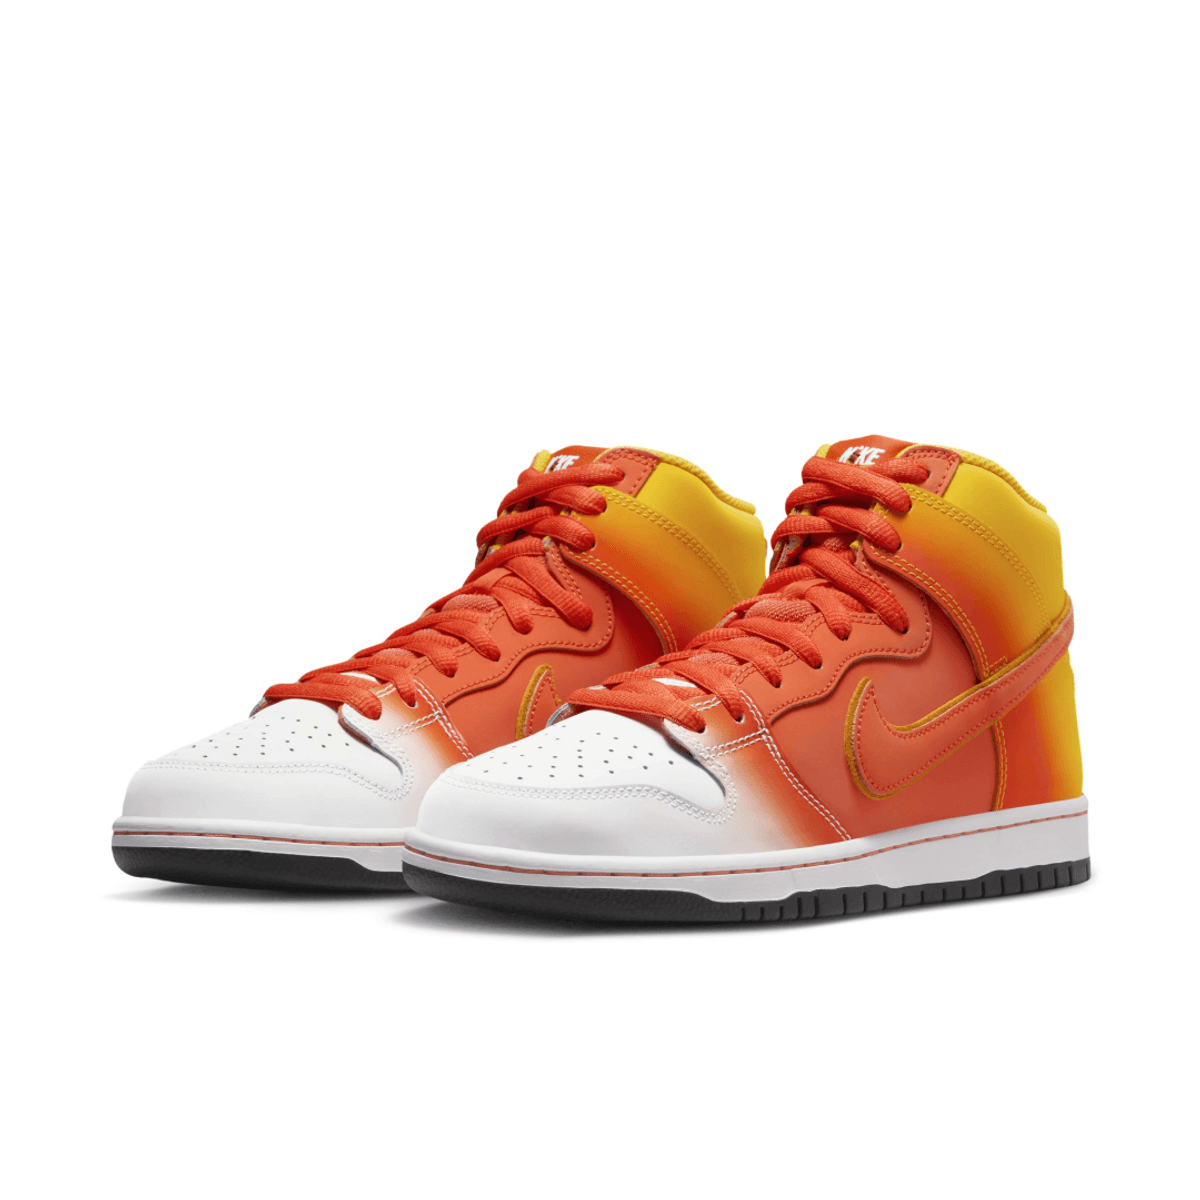 Nike SB Dunk High “Sweet Tooth” Arrives Just In Time For Halloween